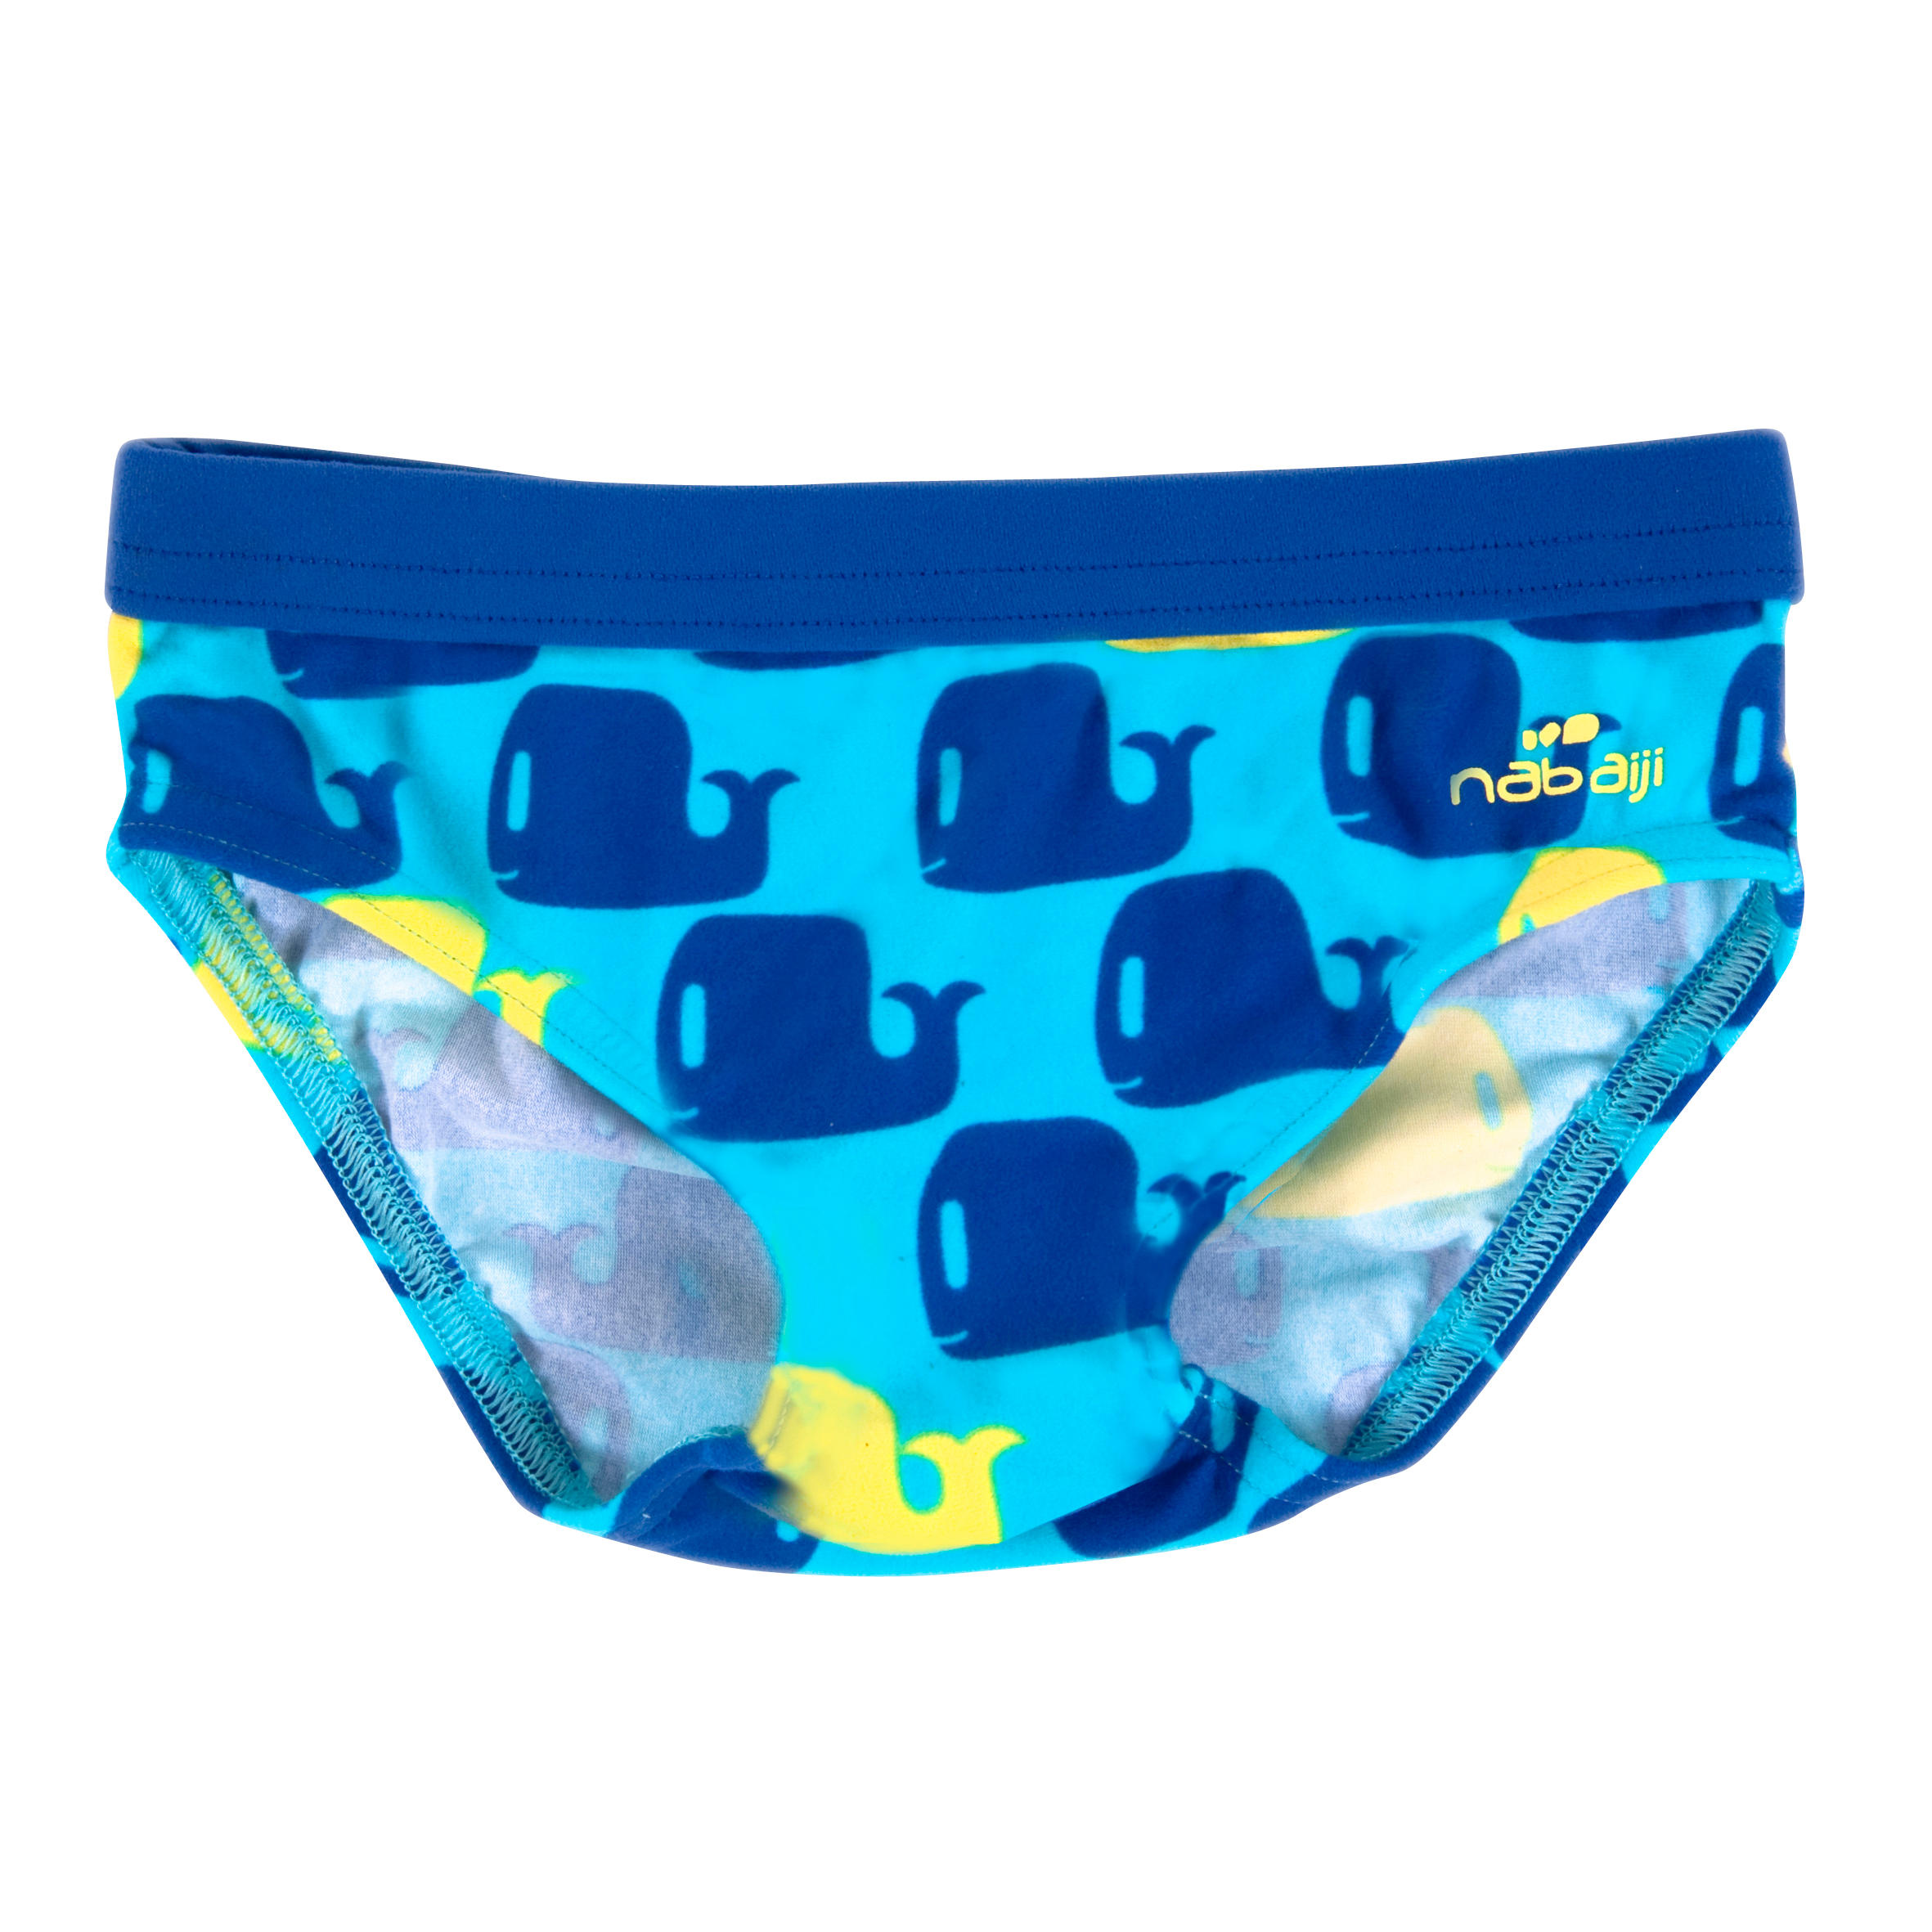 NABAIJI Baby boys' "super soft" swimming trunks with blue and yellow "whale" print